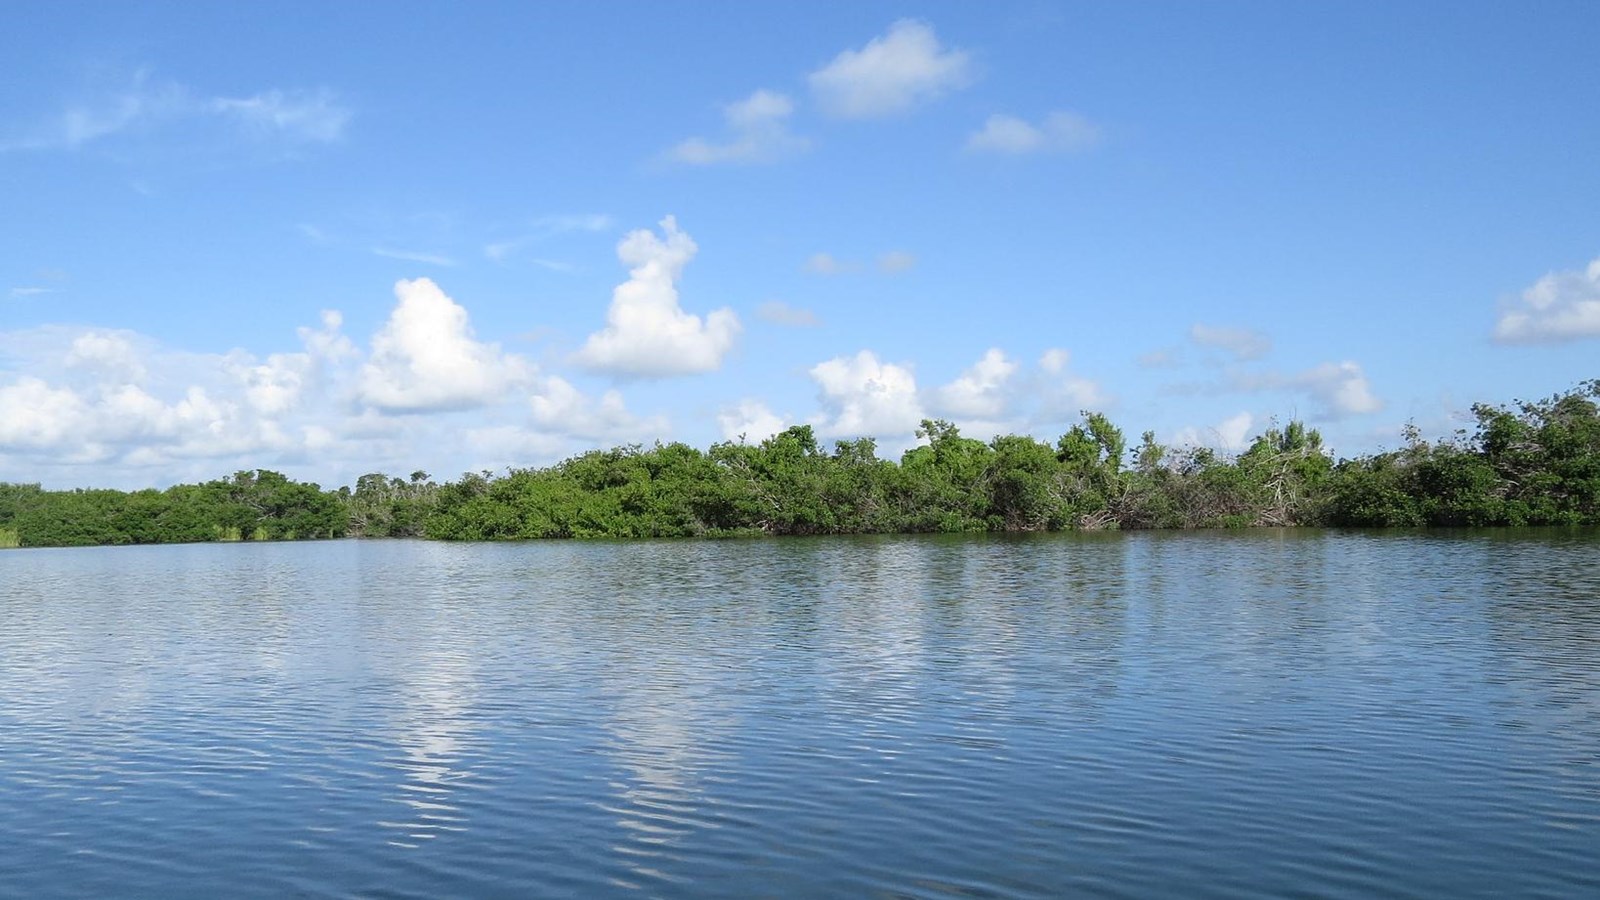 Blue sky and green vegetation is reflected in the calm waters of Paurotis Pond